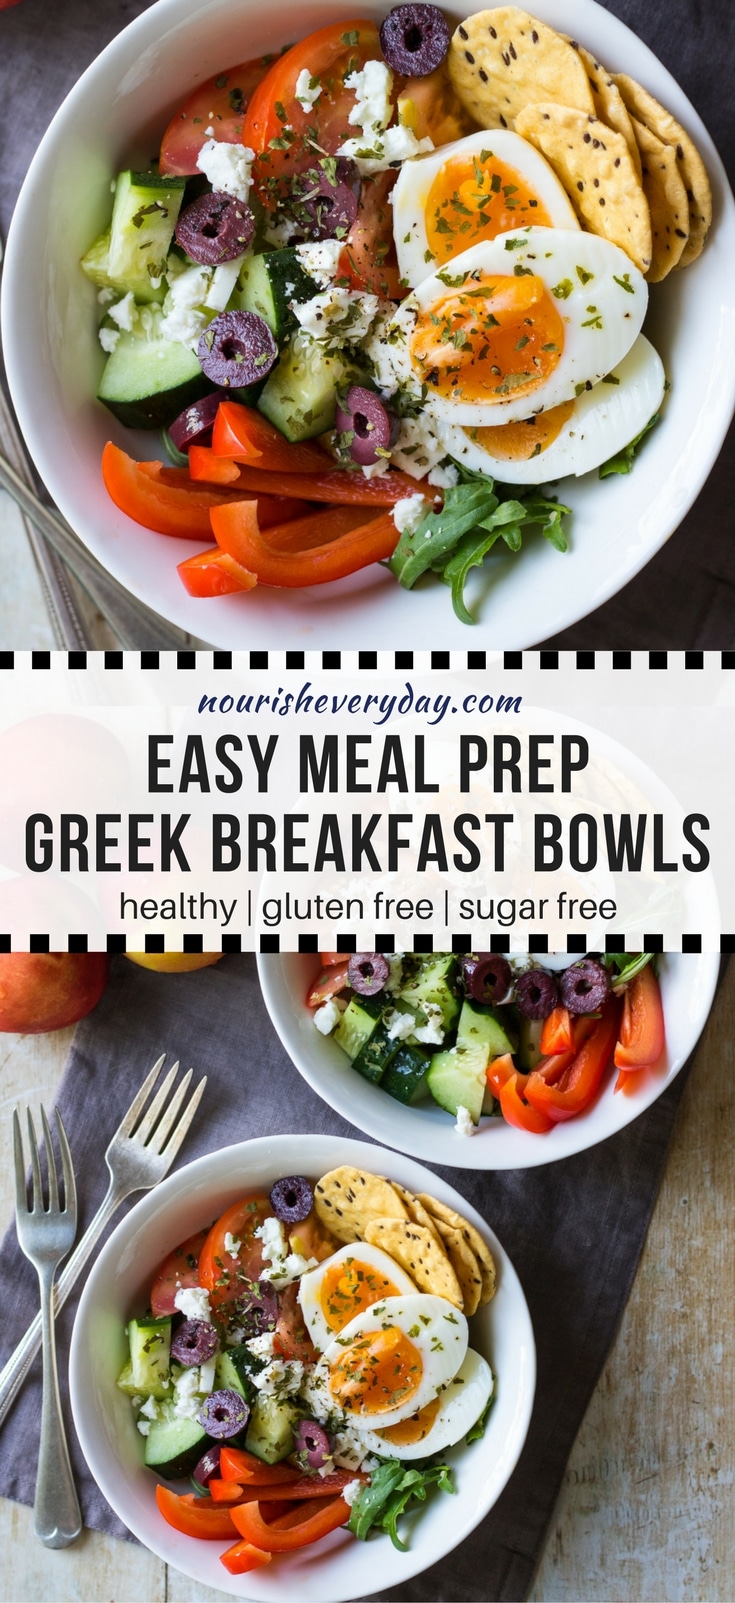 Meal prep breakfast bowls, Greek style! A fresh breakfast salad base topped with boiled eggs, olives and feta. Easy and healthy. Tuck in some crackers and you're all set! #mealprep #breakfastbowl #breakfastsalad #glutenfree